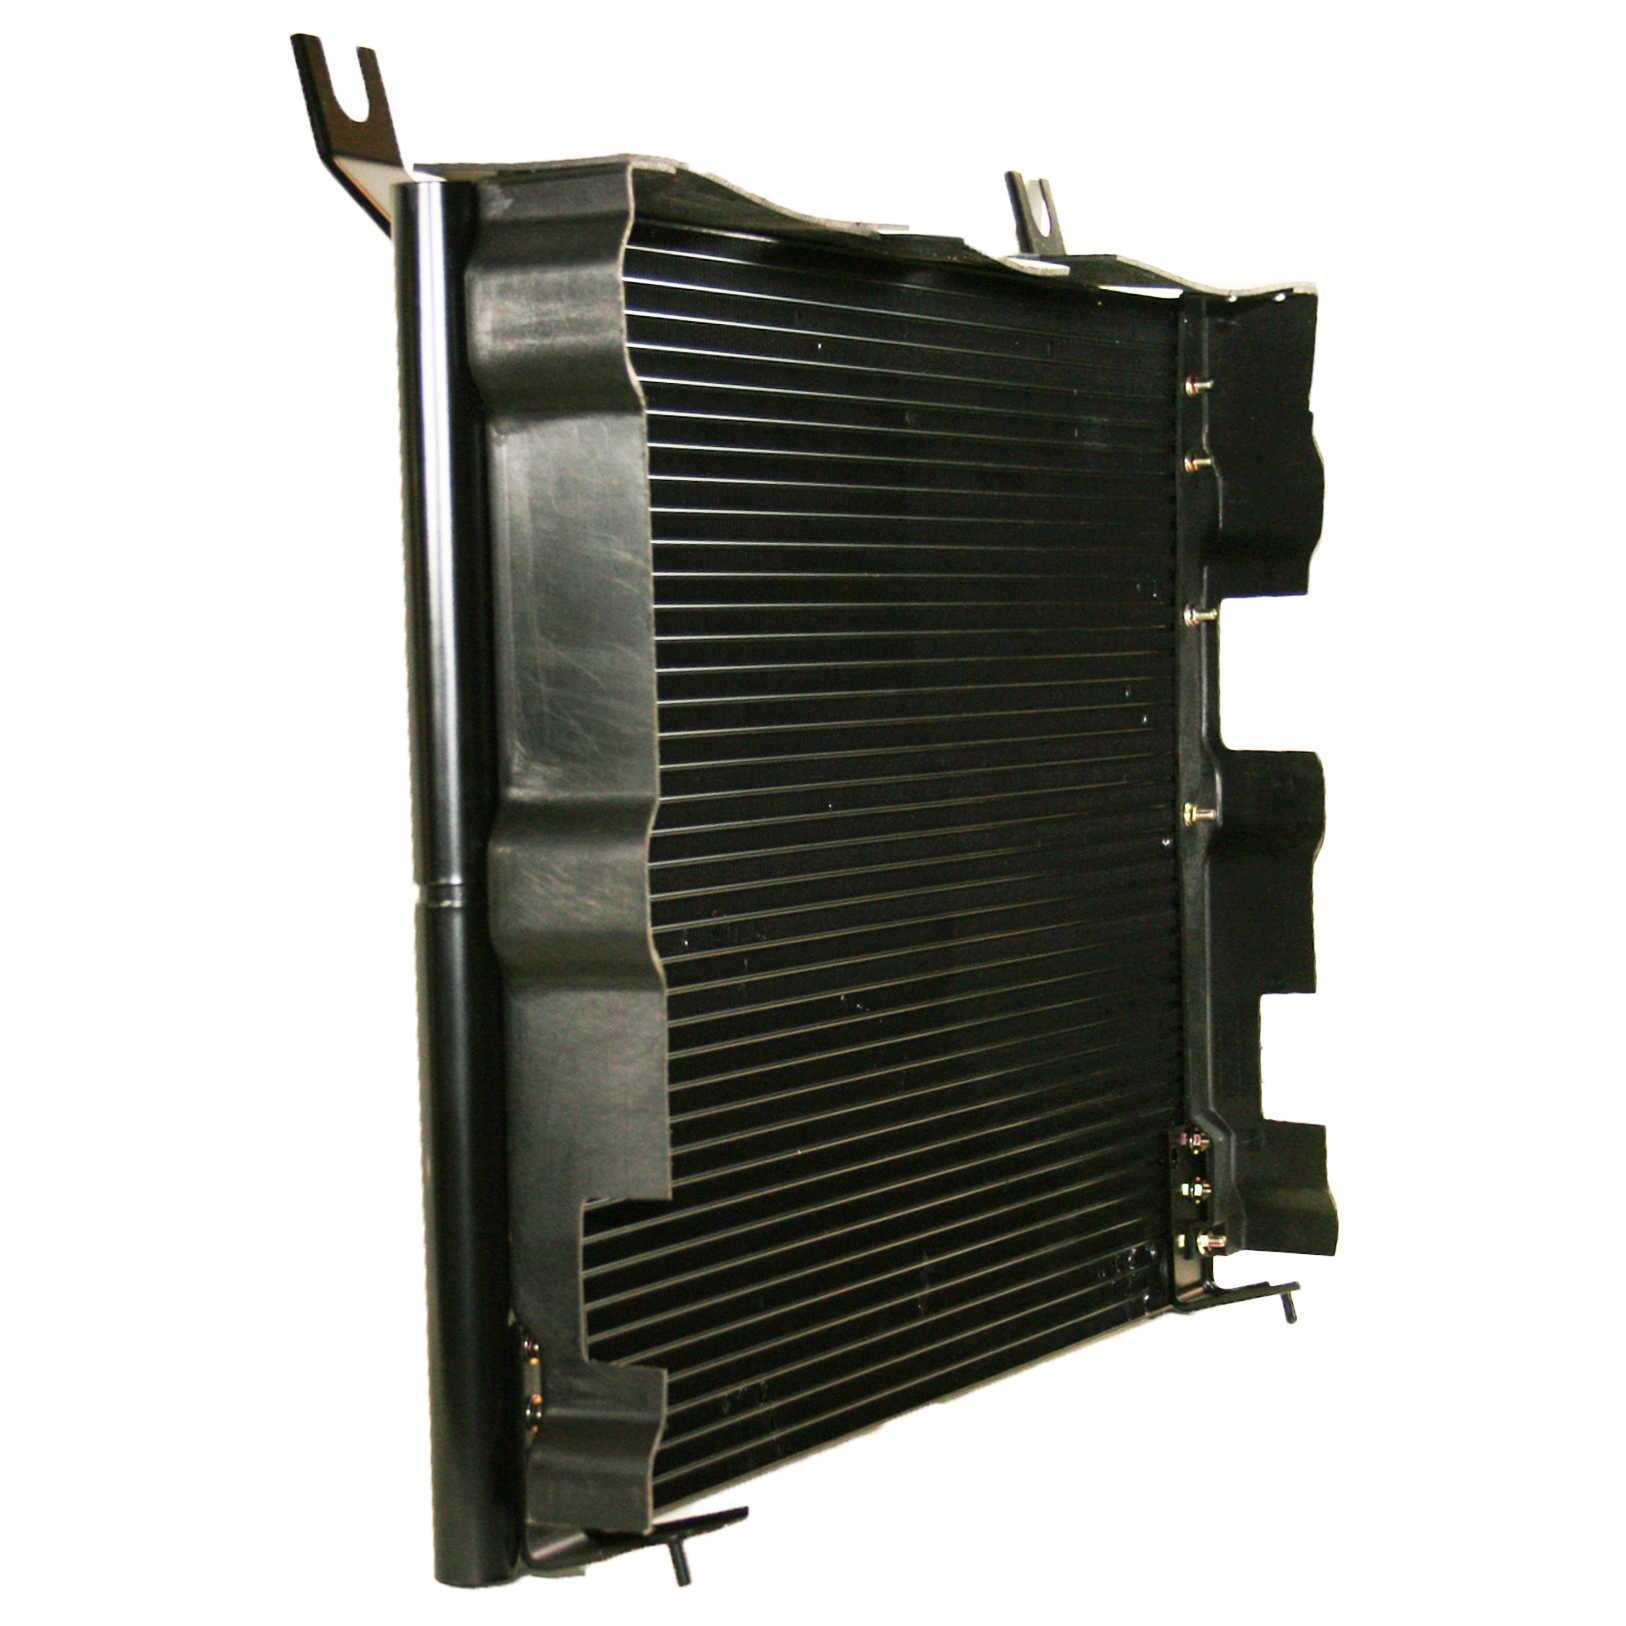 TCW Condenser 44-3016 New Product Image field_60b6a13a6e67c